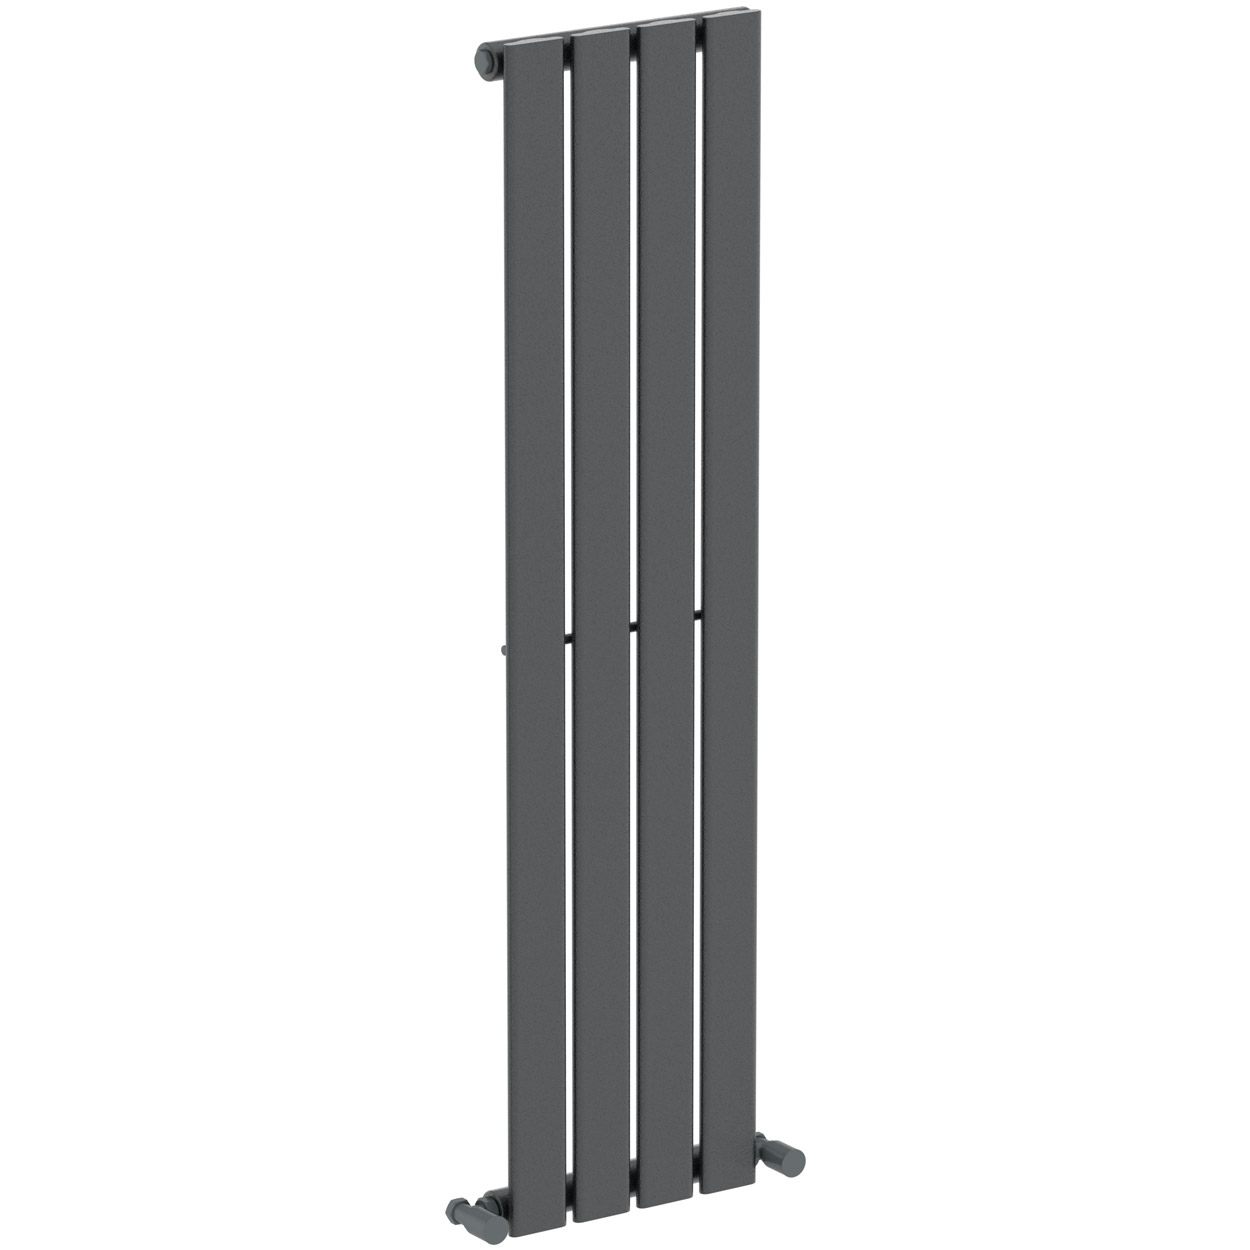 The Heating Co. Tate anthracite grey flat vertical radiator 1200 x 300